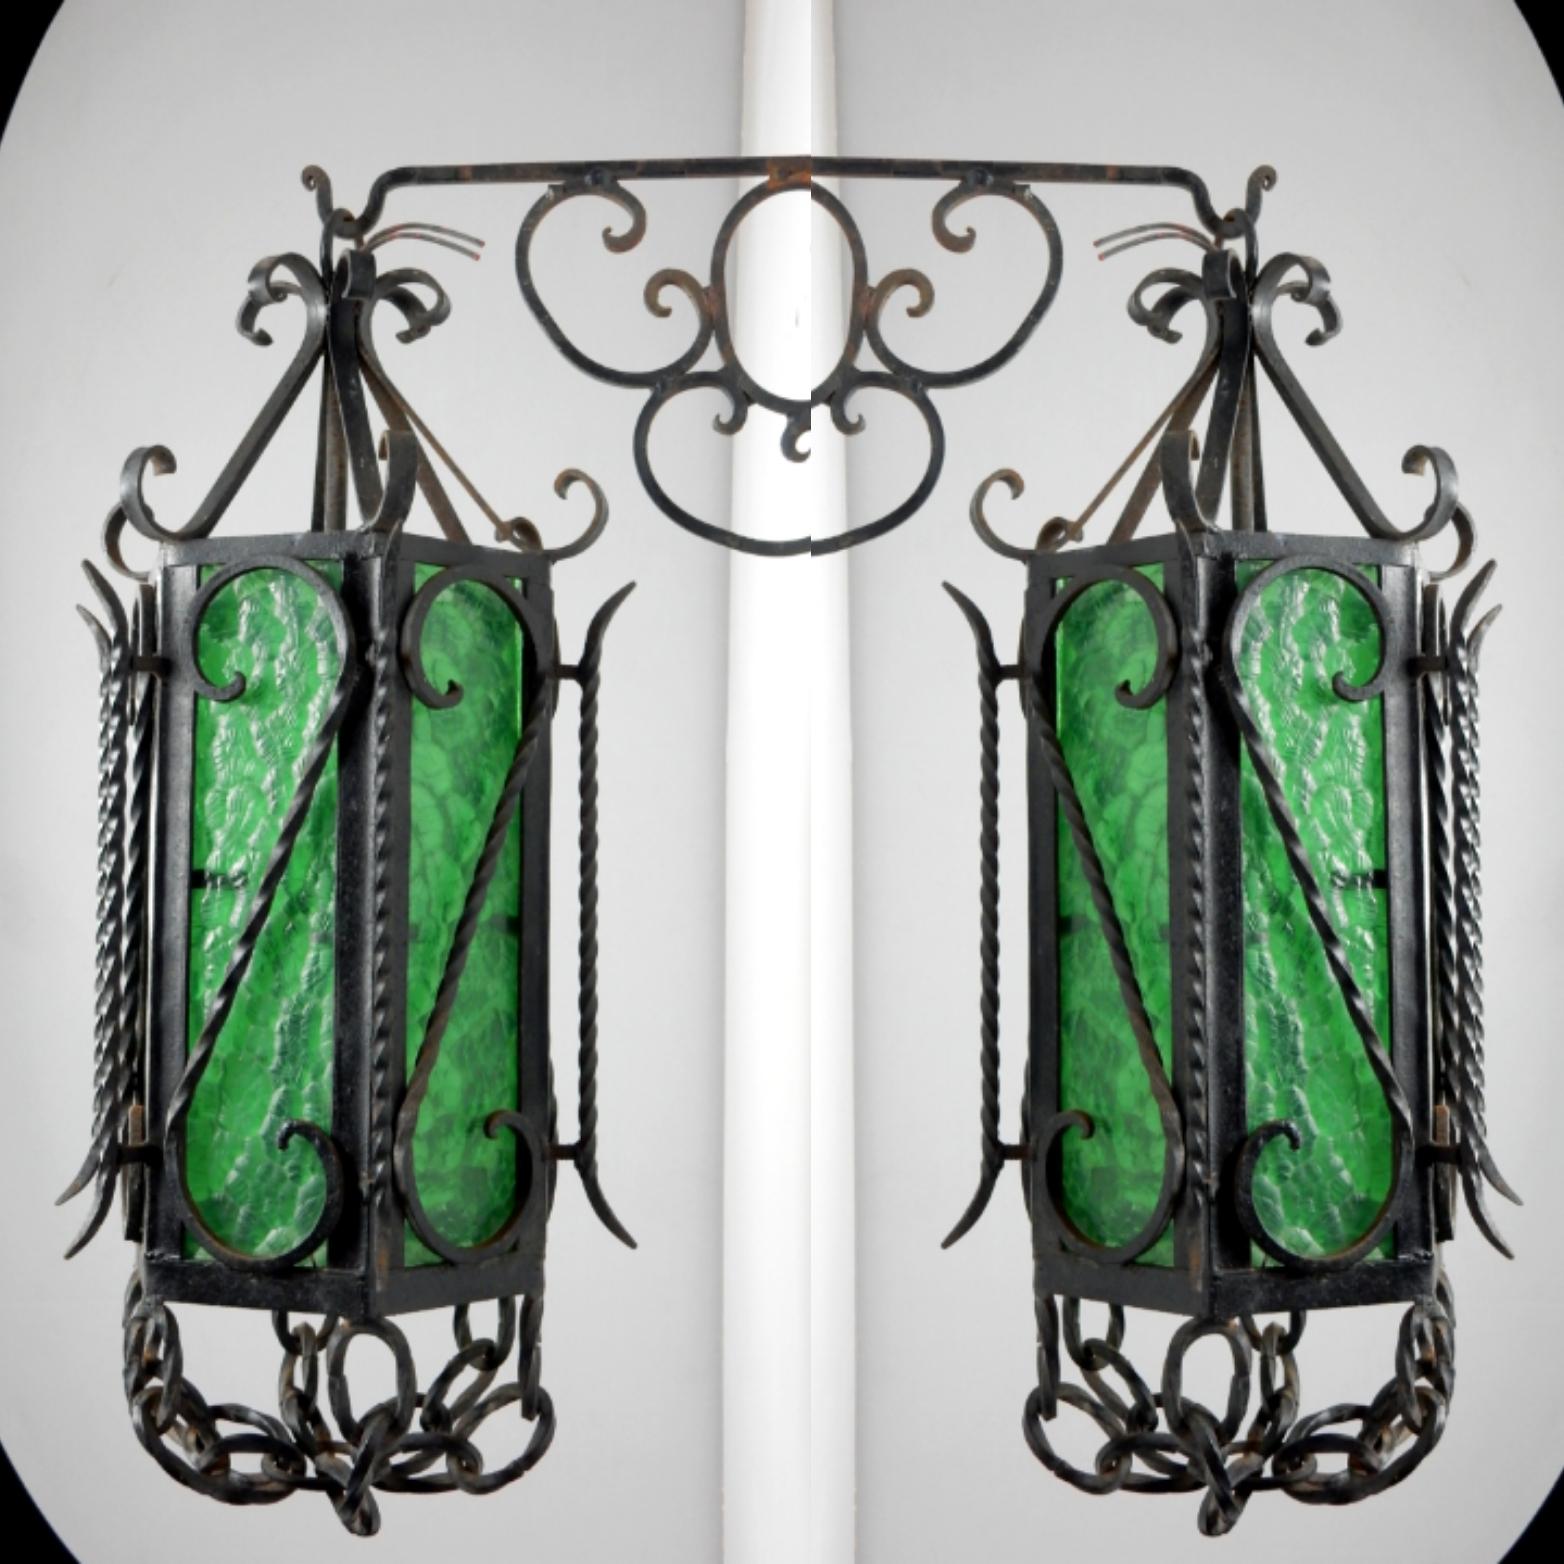 Pair of ornate wrought iron garden/patio sconces.
6 sided with original emerald green wavy glass,
Circa 1950's.
  